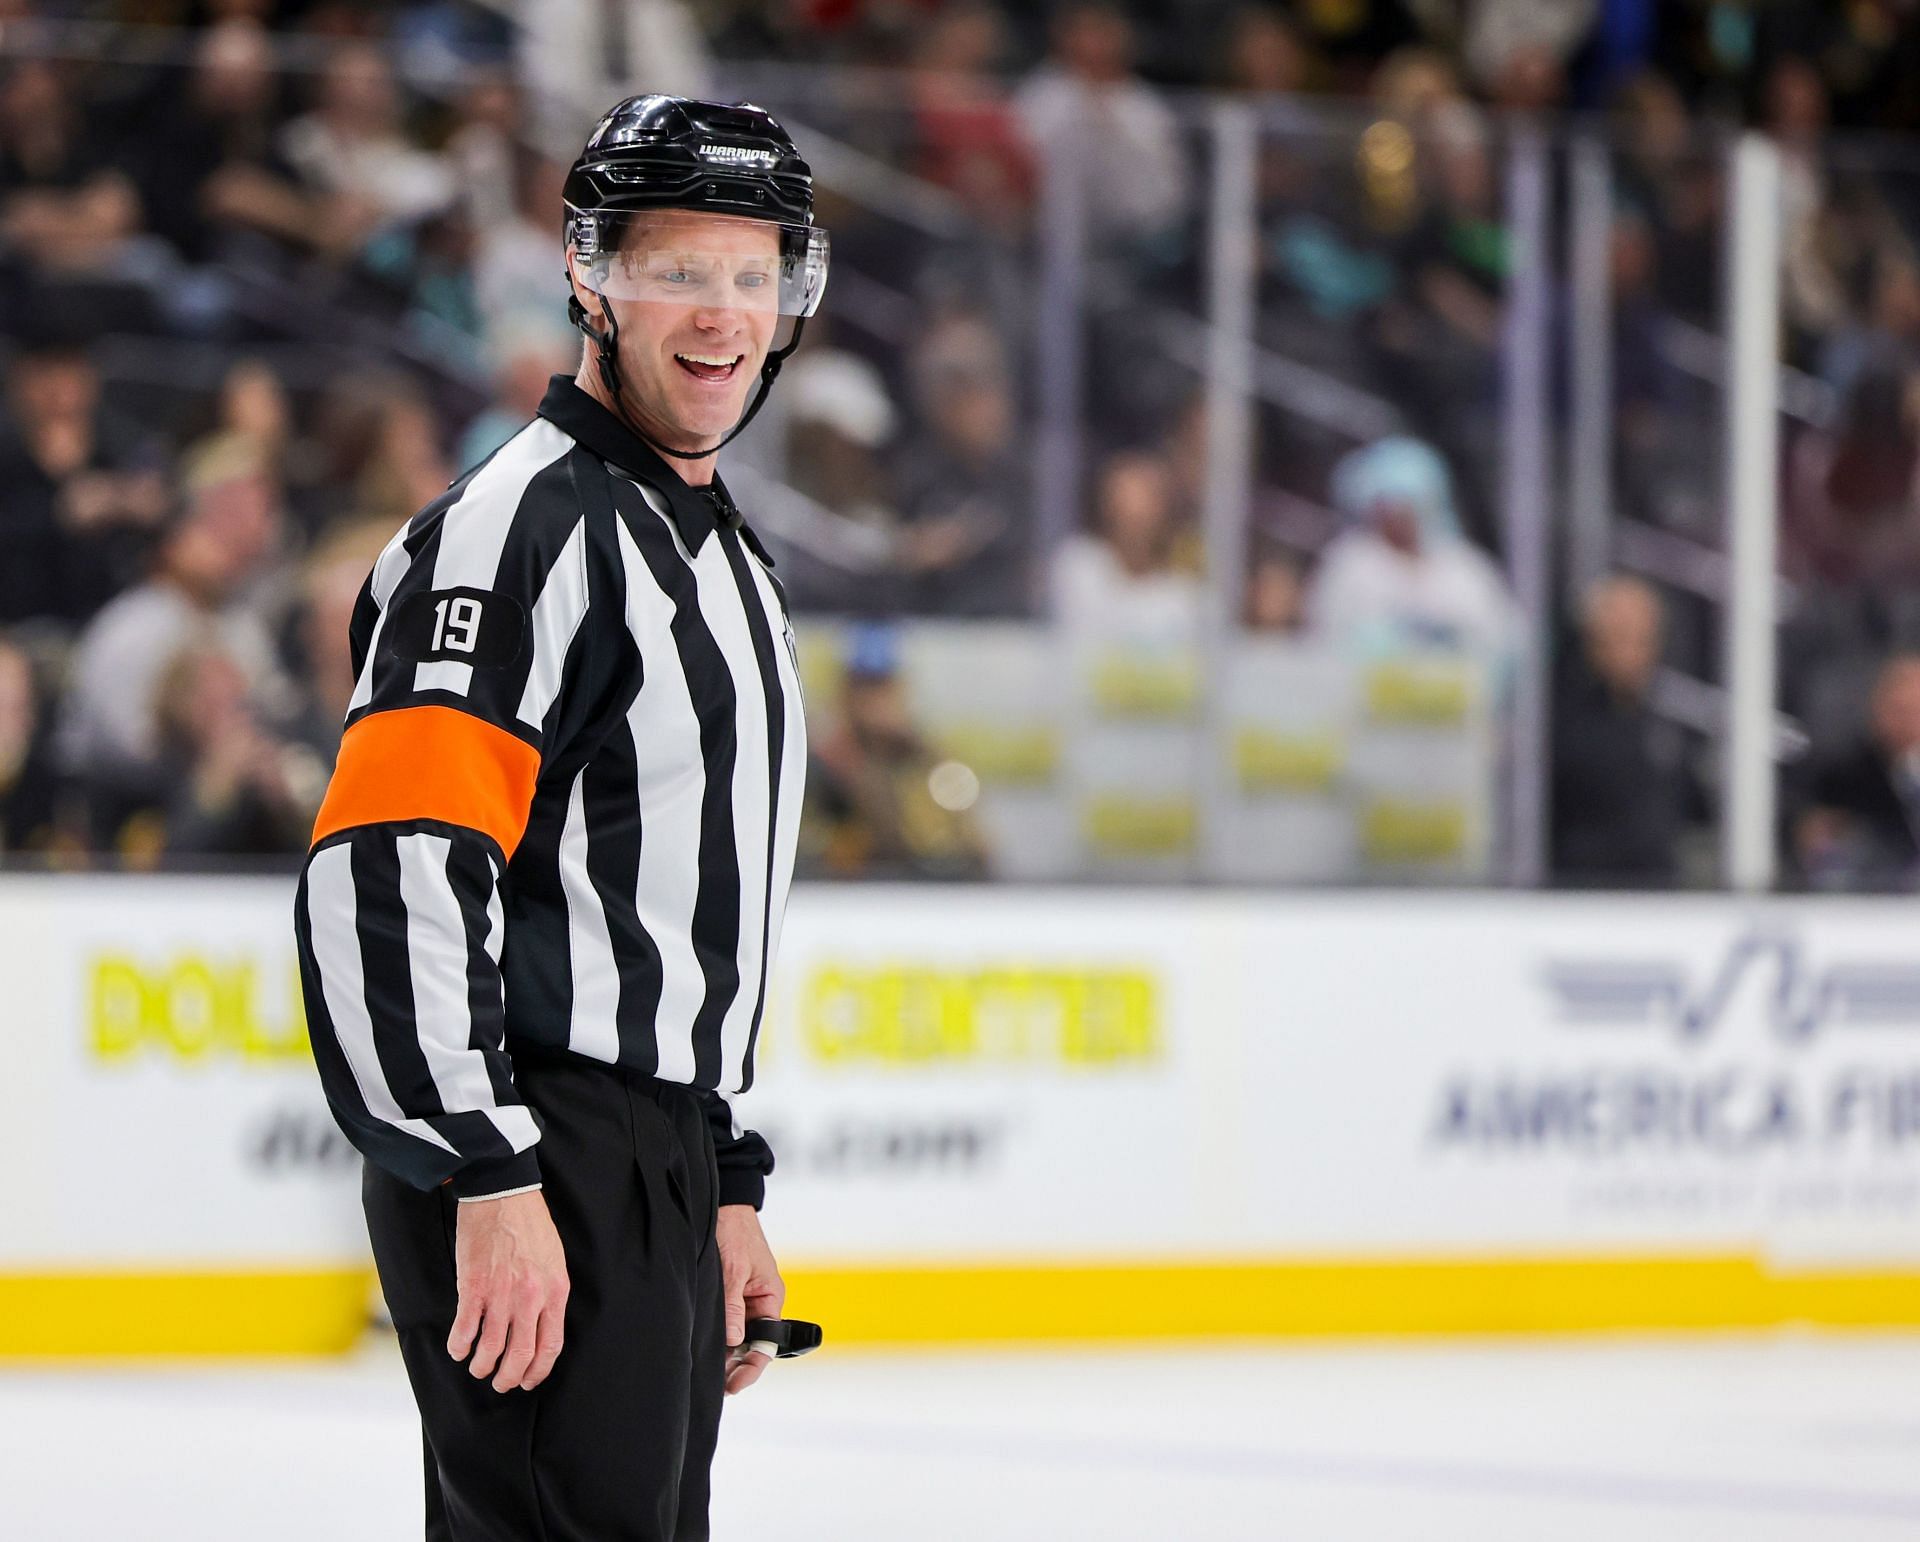 How much do referees make in the NHL?